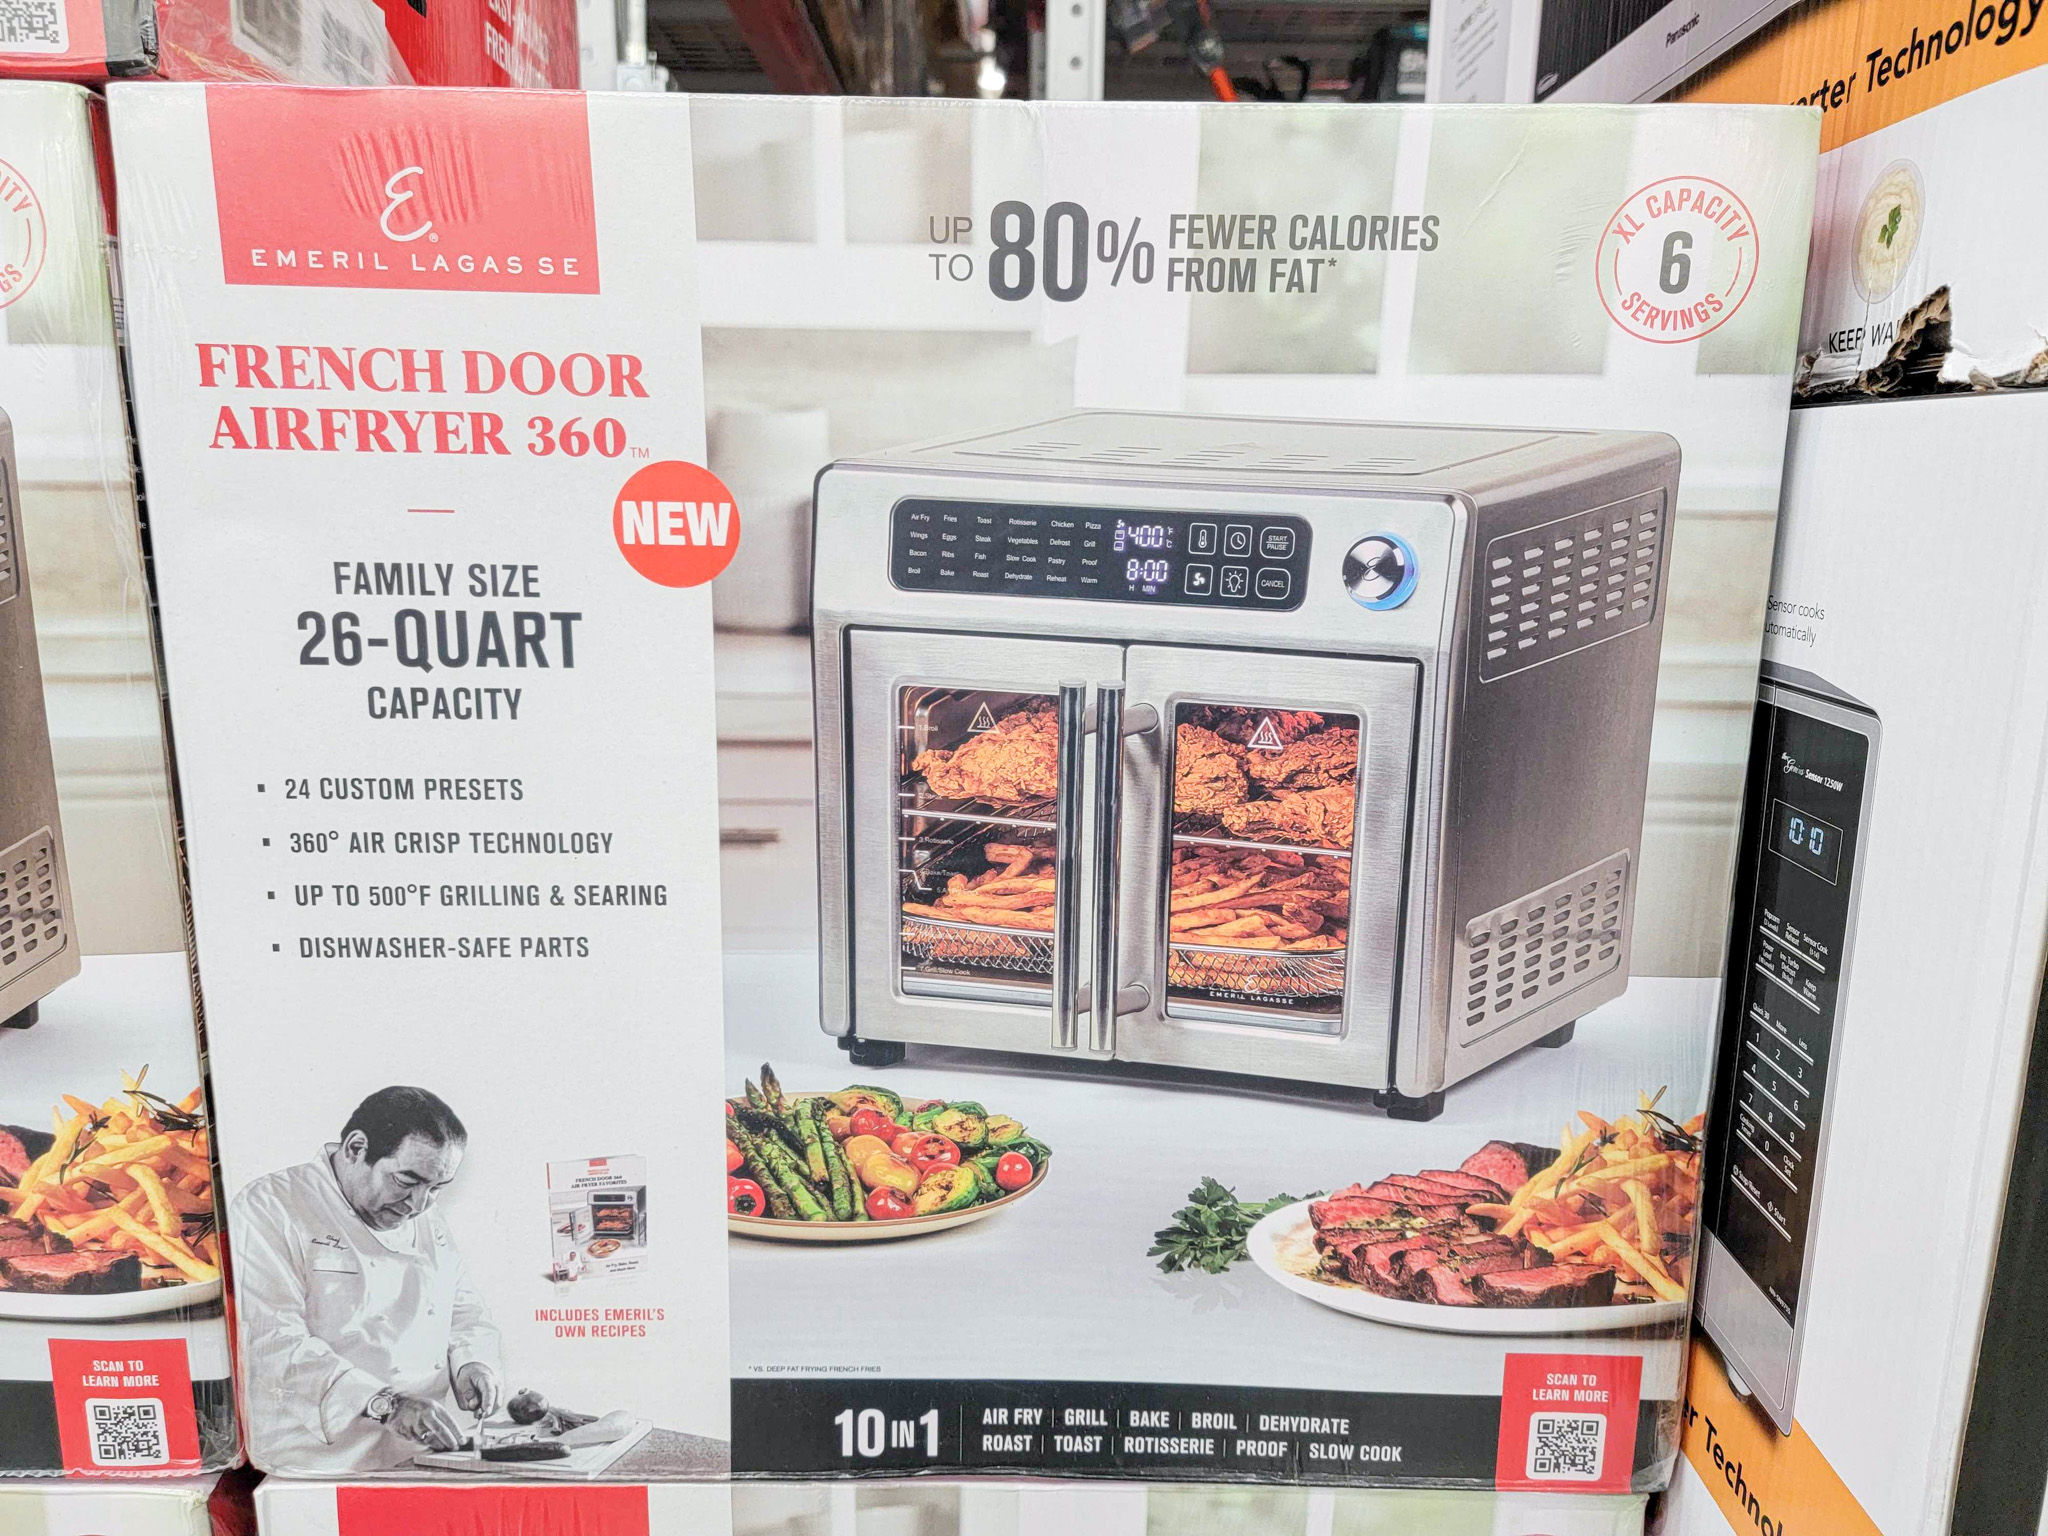 Emeril Lagasse Stainless Steel 10-in-1 French Door AirFryer 360 - Sam's Club